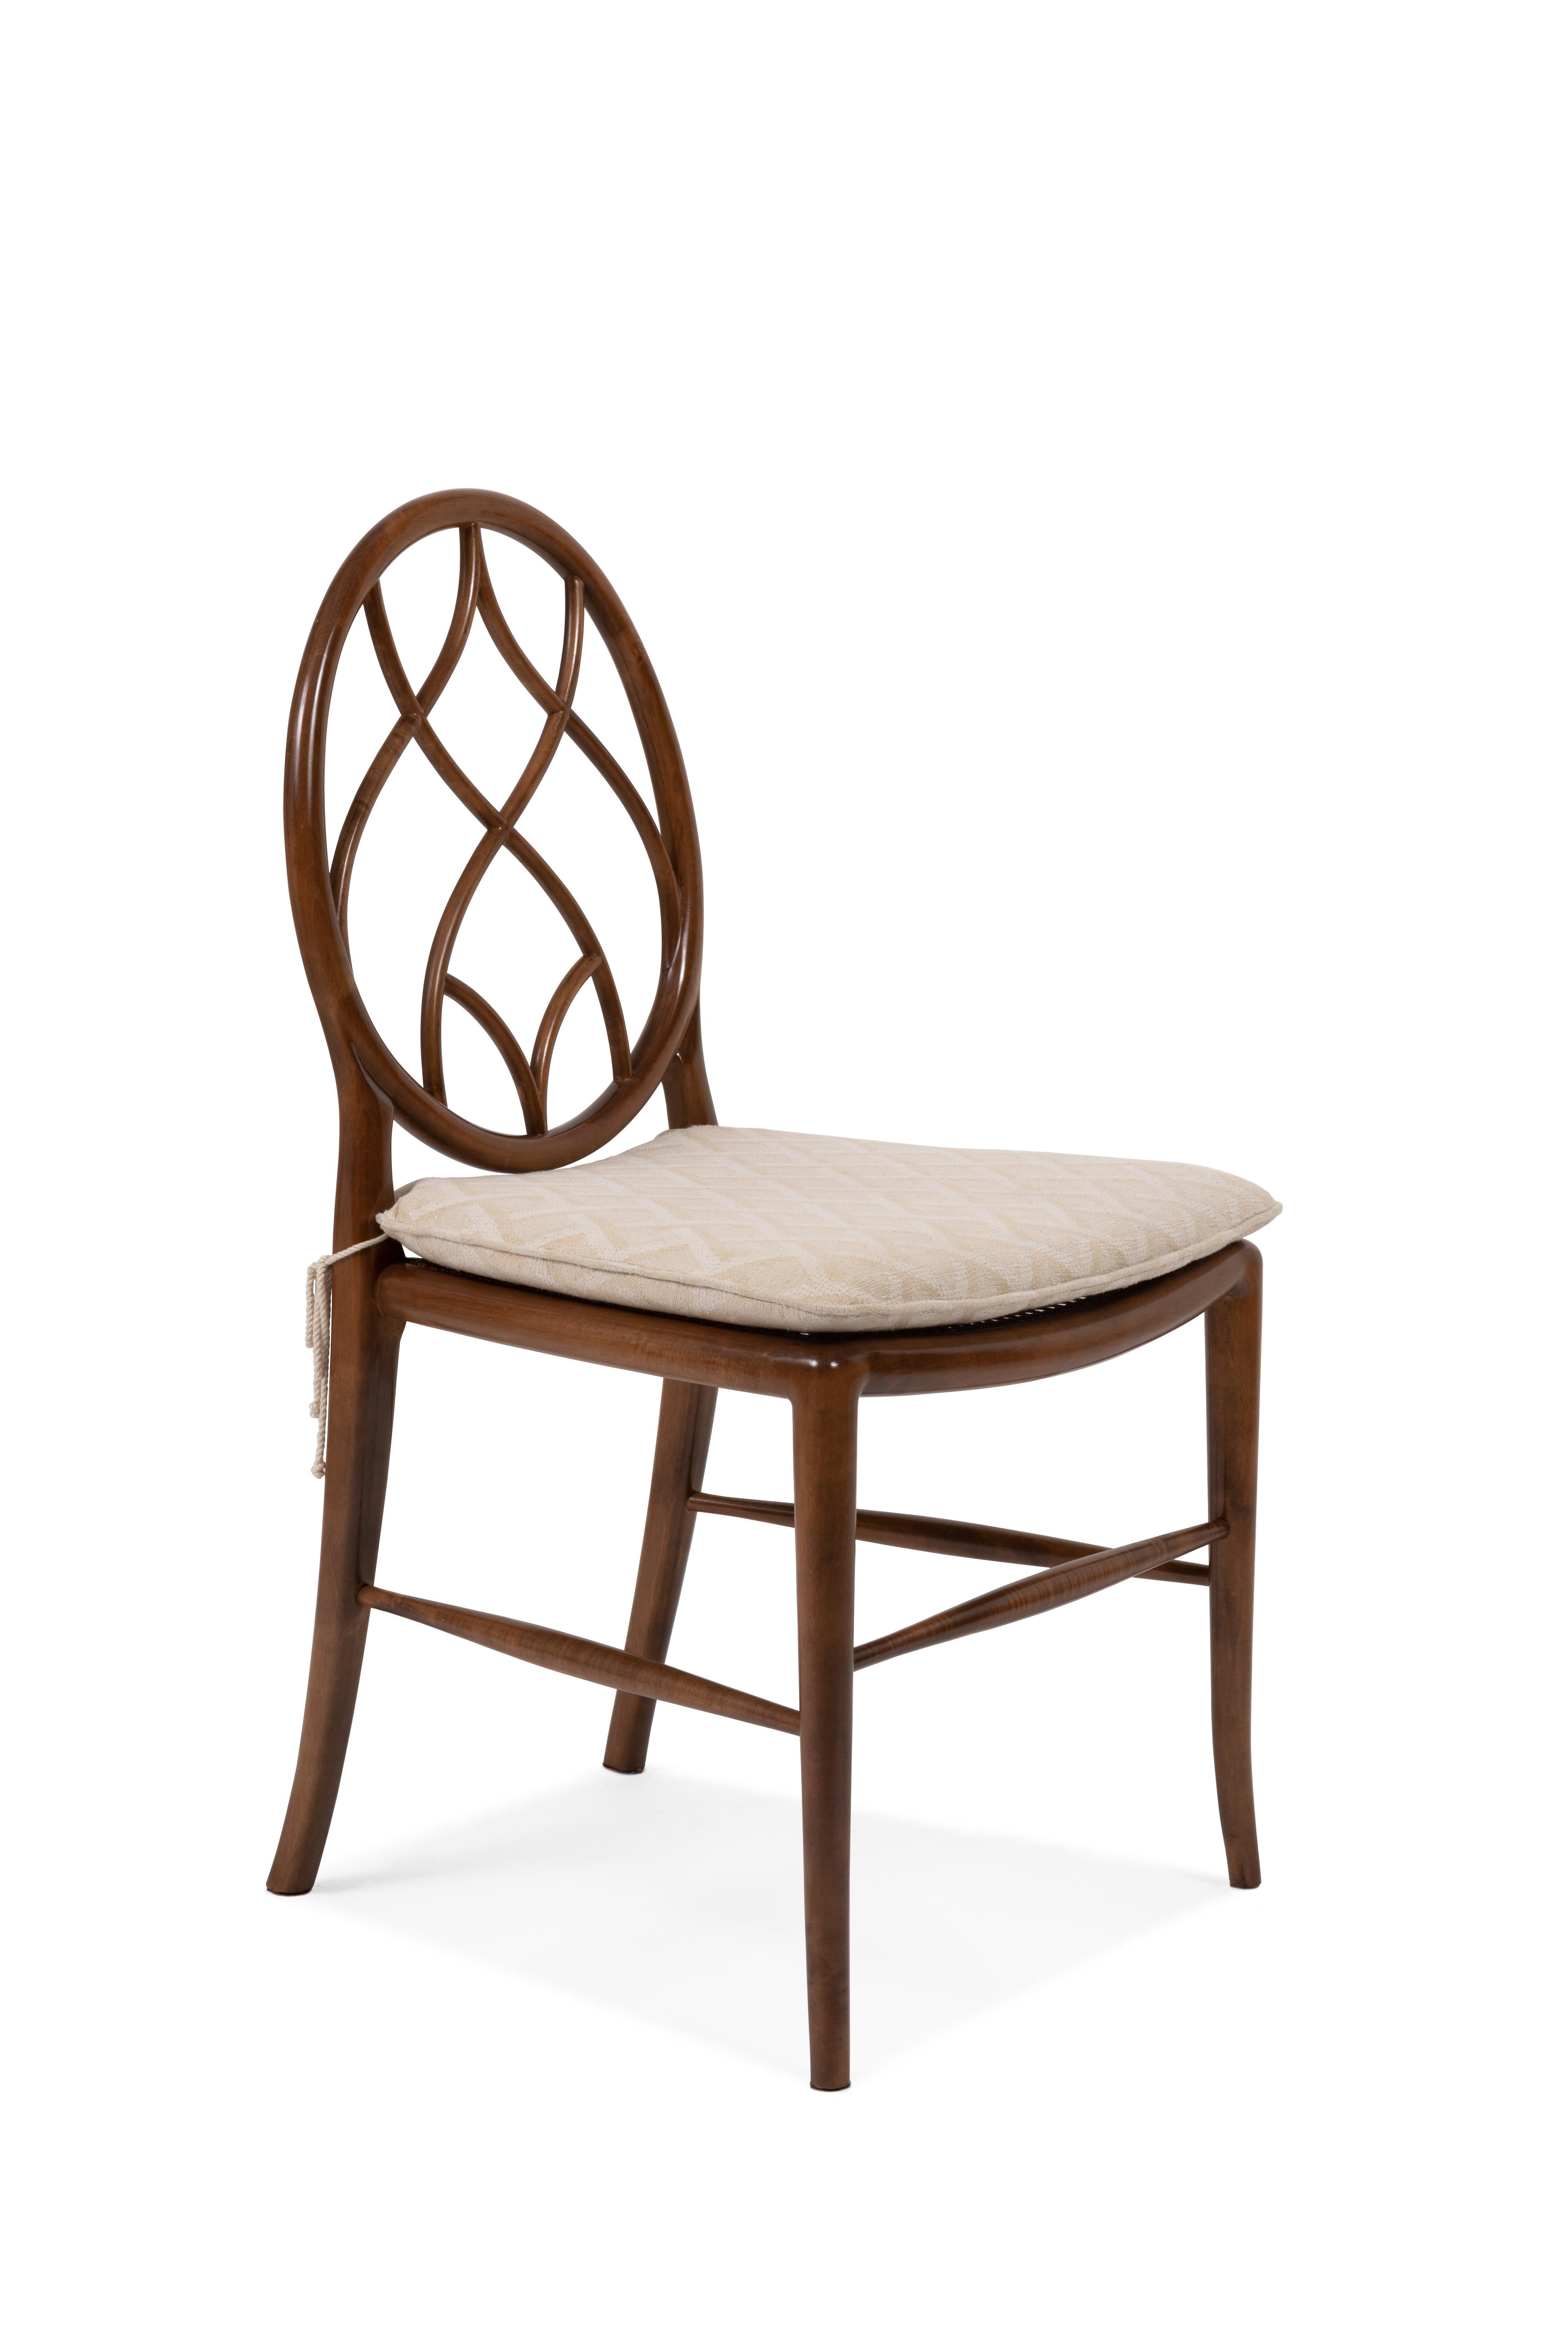 Wooden Decorative Dining Chair with Armrests, Straw Caned Seat with Seat Pillow For Sale 3